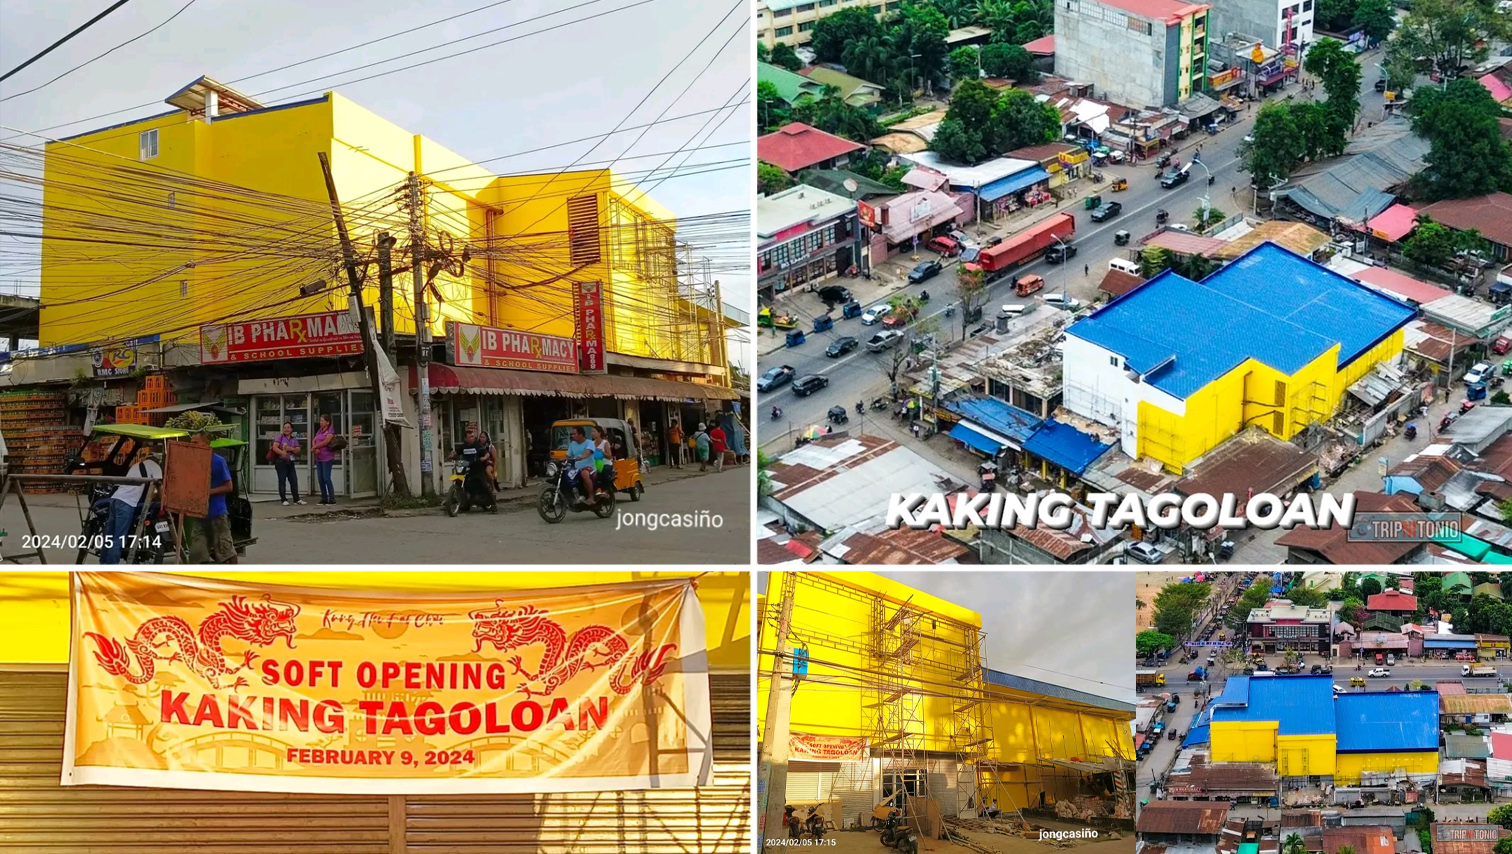 PROJECT WATCH: Kaking Tagoloan to have soft opening on February 9